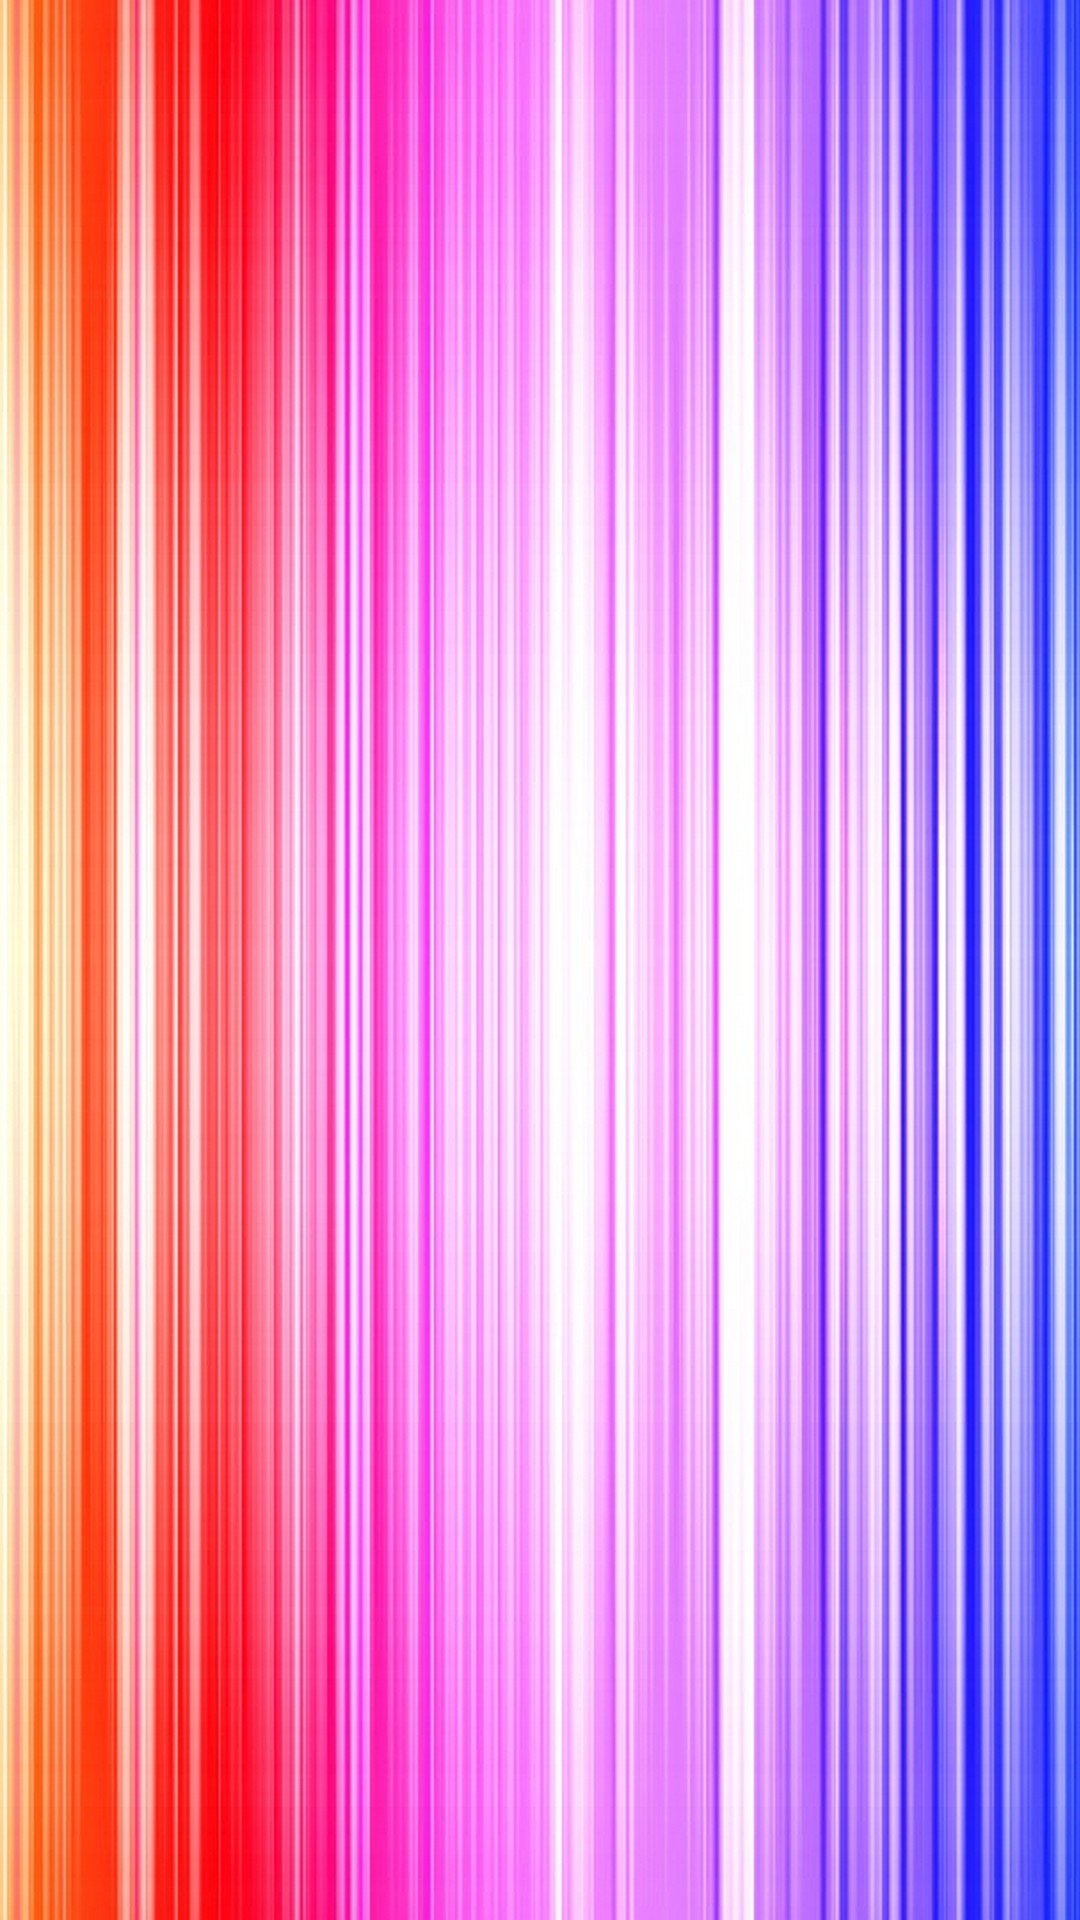 Wallpaper Rainbow Colors Android With Image Resolution - Majorelle Blue - HD Wallpaper 